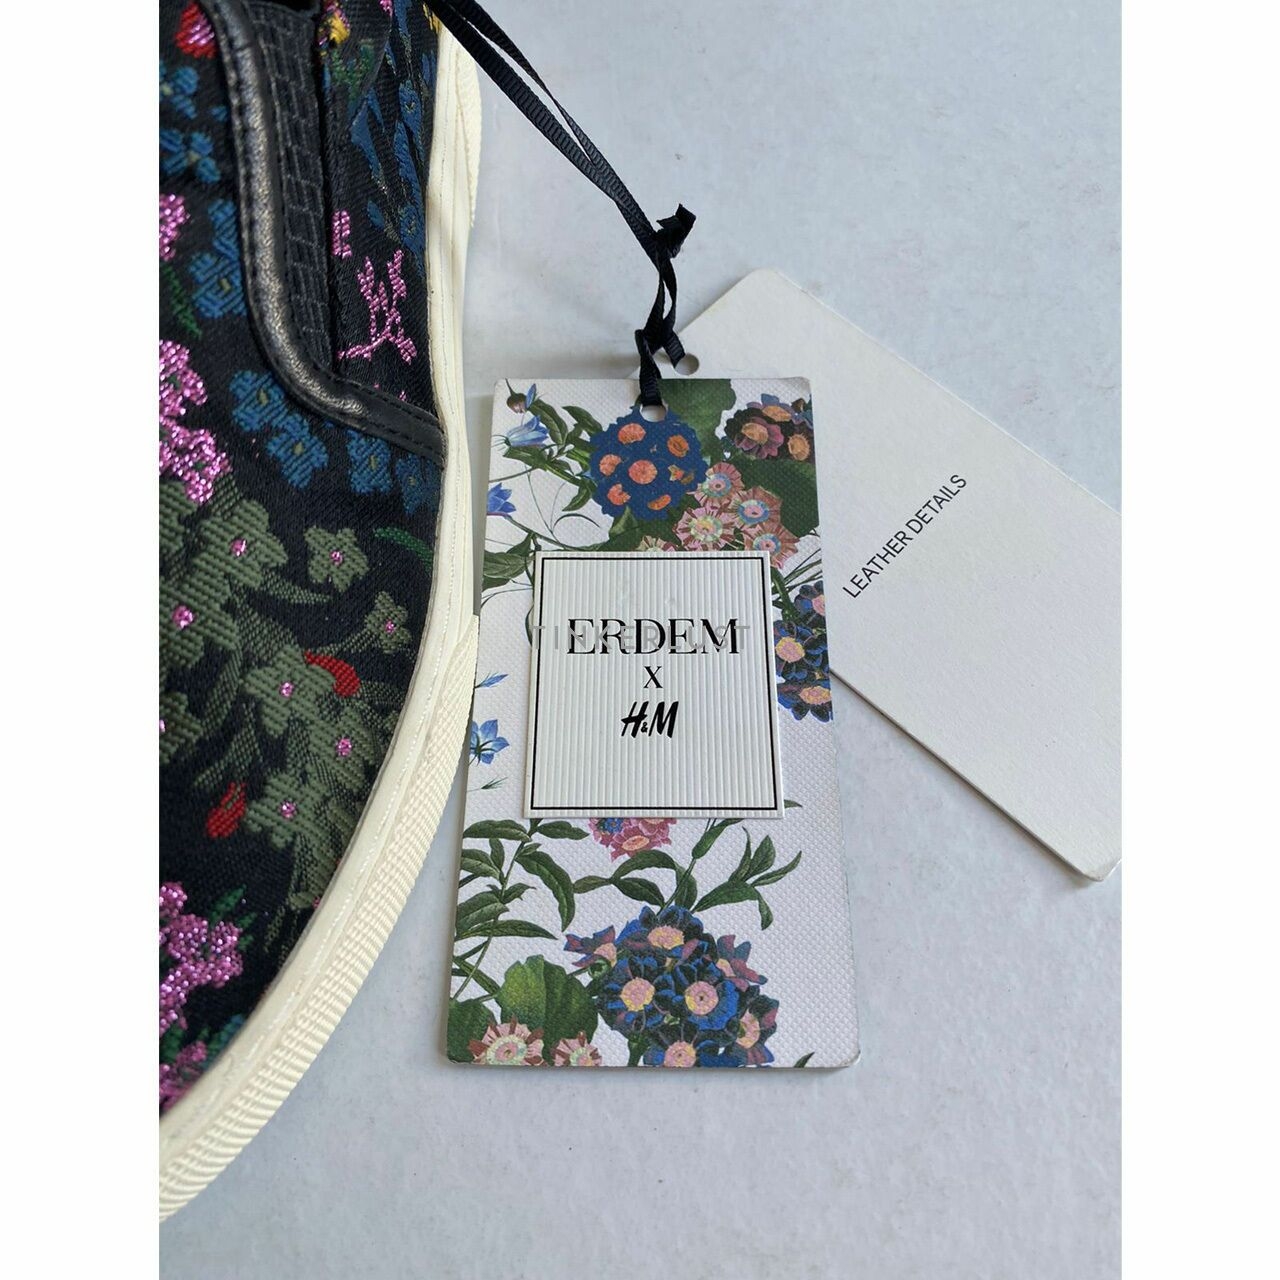 Erdem x H&M Jacquard Weave Fabric with a Shimmering Floral Pattern Slip On Sneakers